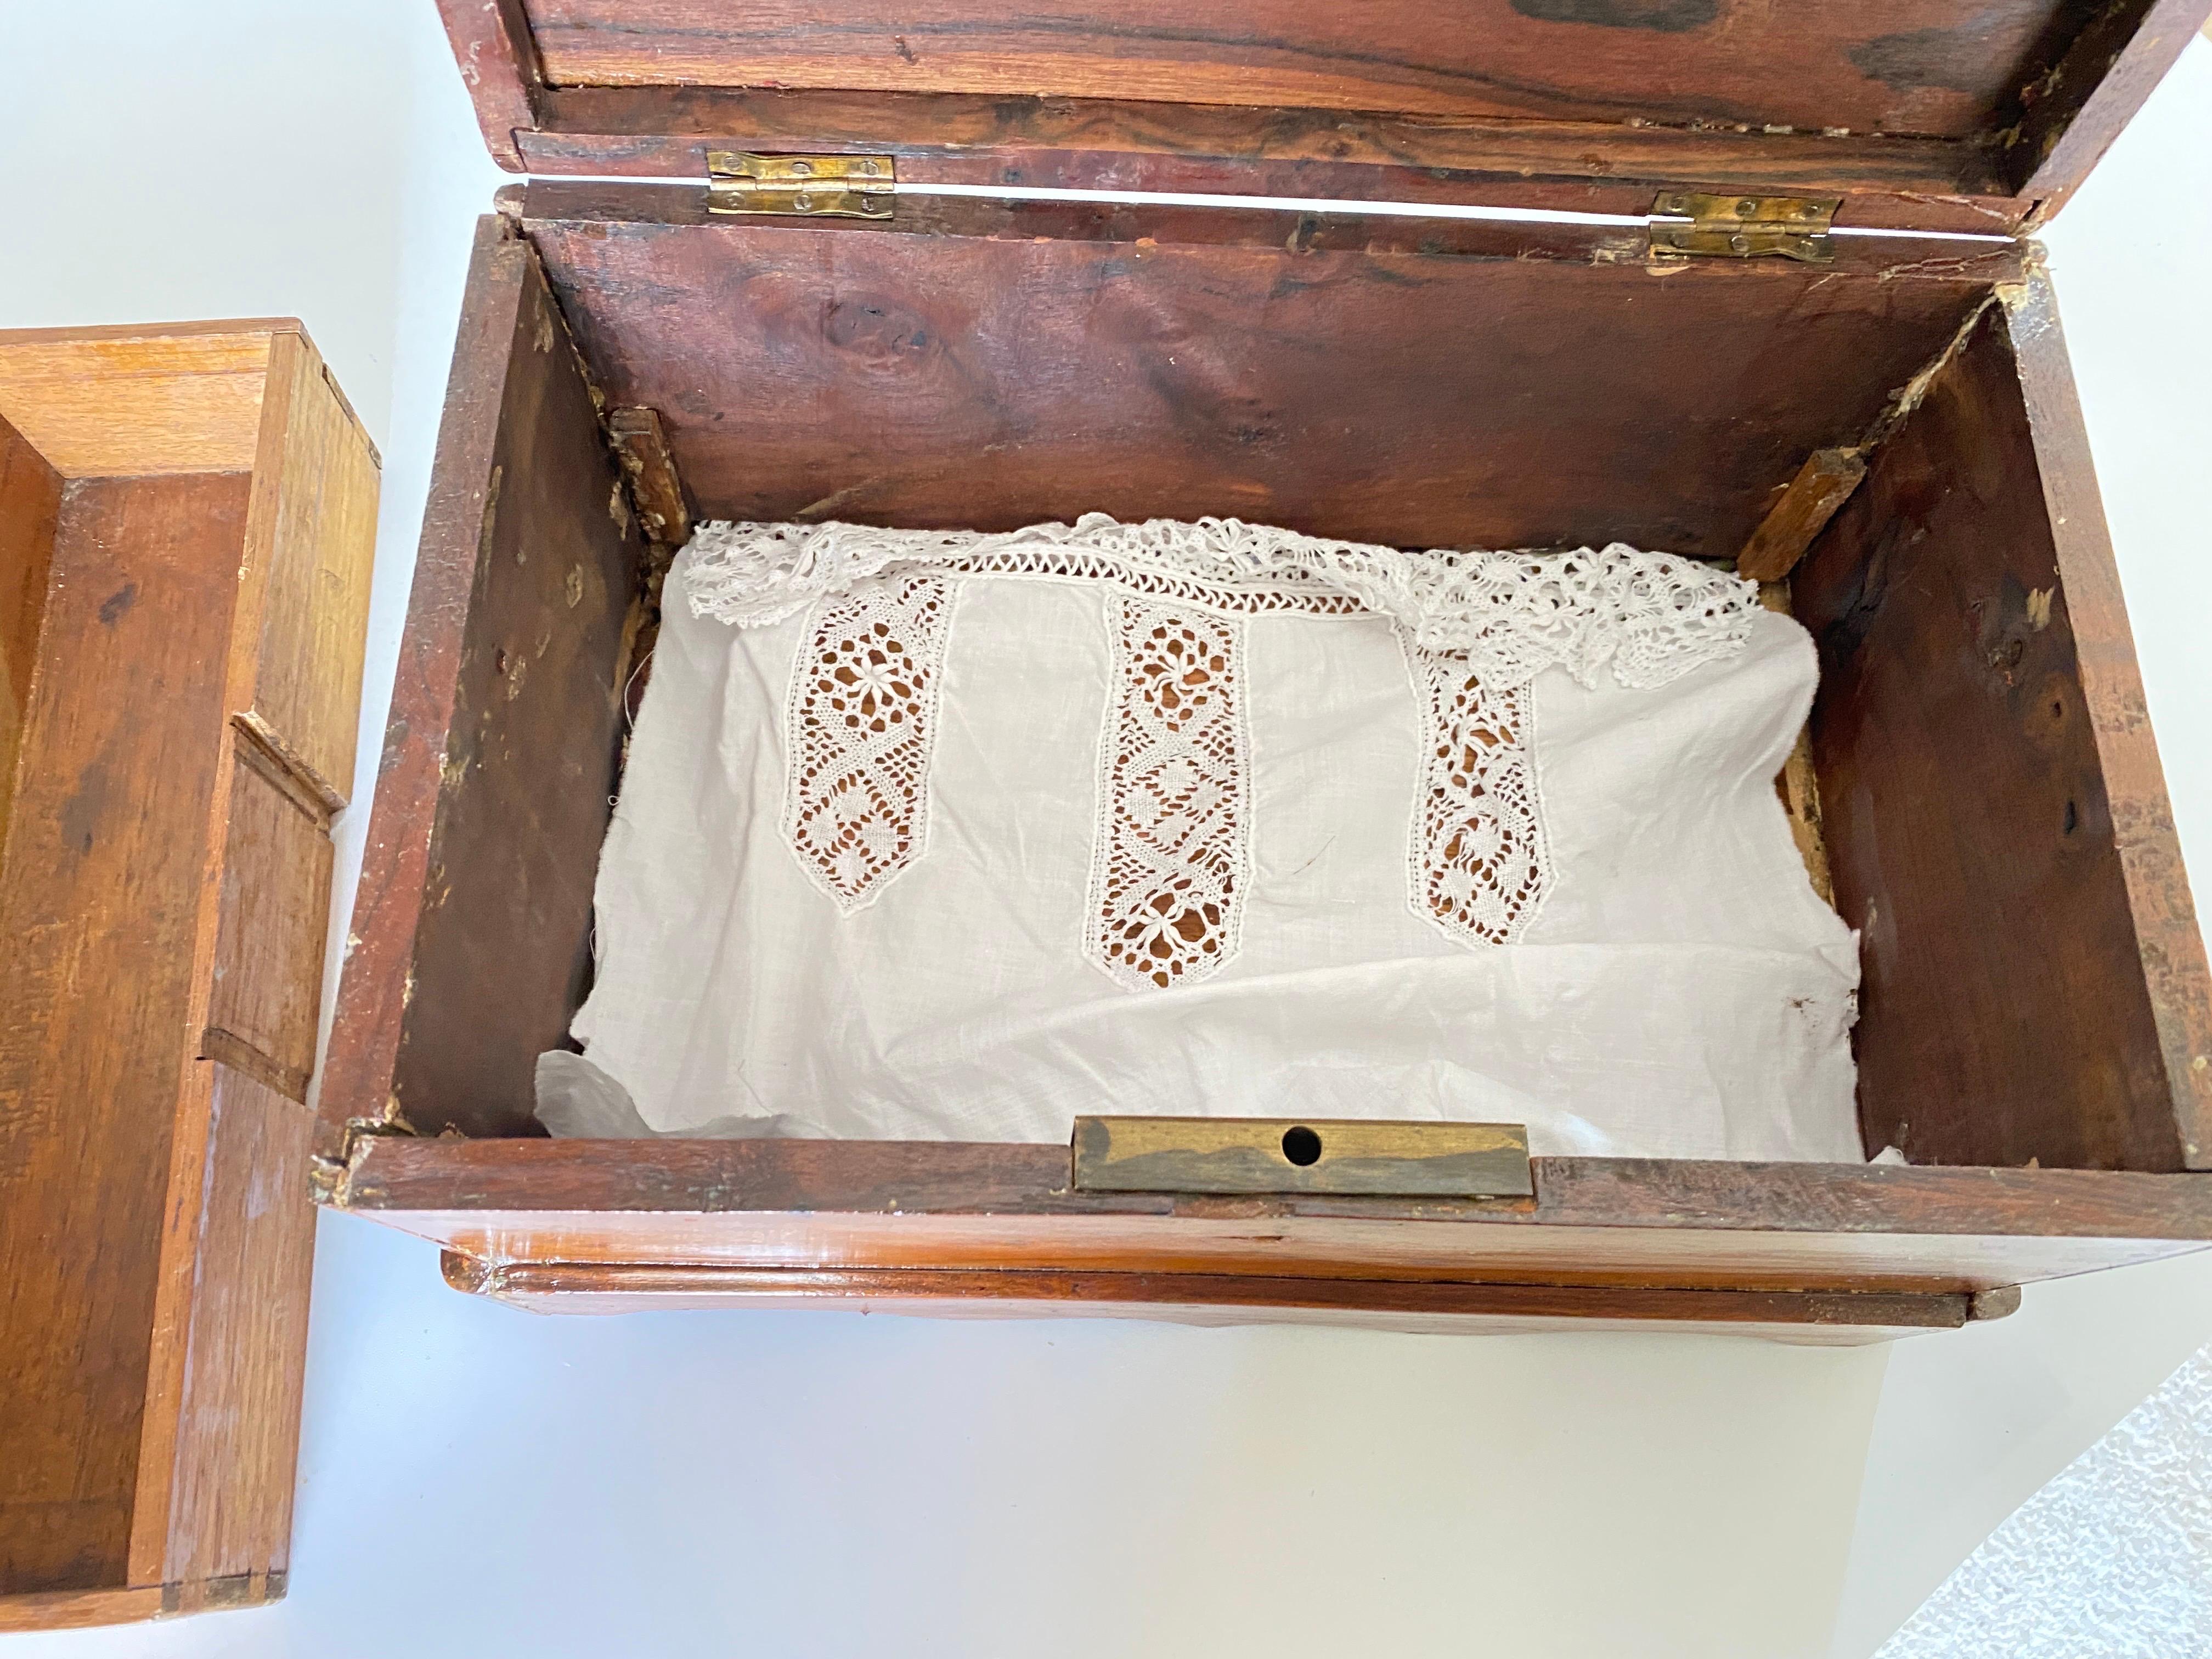 This large box is a jewelry box or a decorative box. It was made in the 19th century, in England, Period. Its lid is made in wood, brown in color. Holding several compartments.